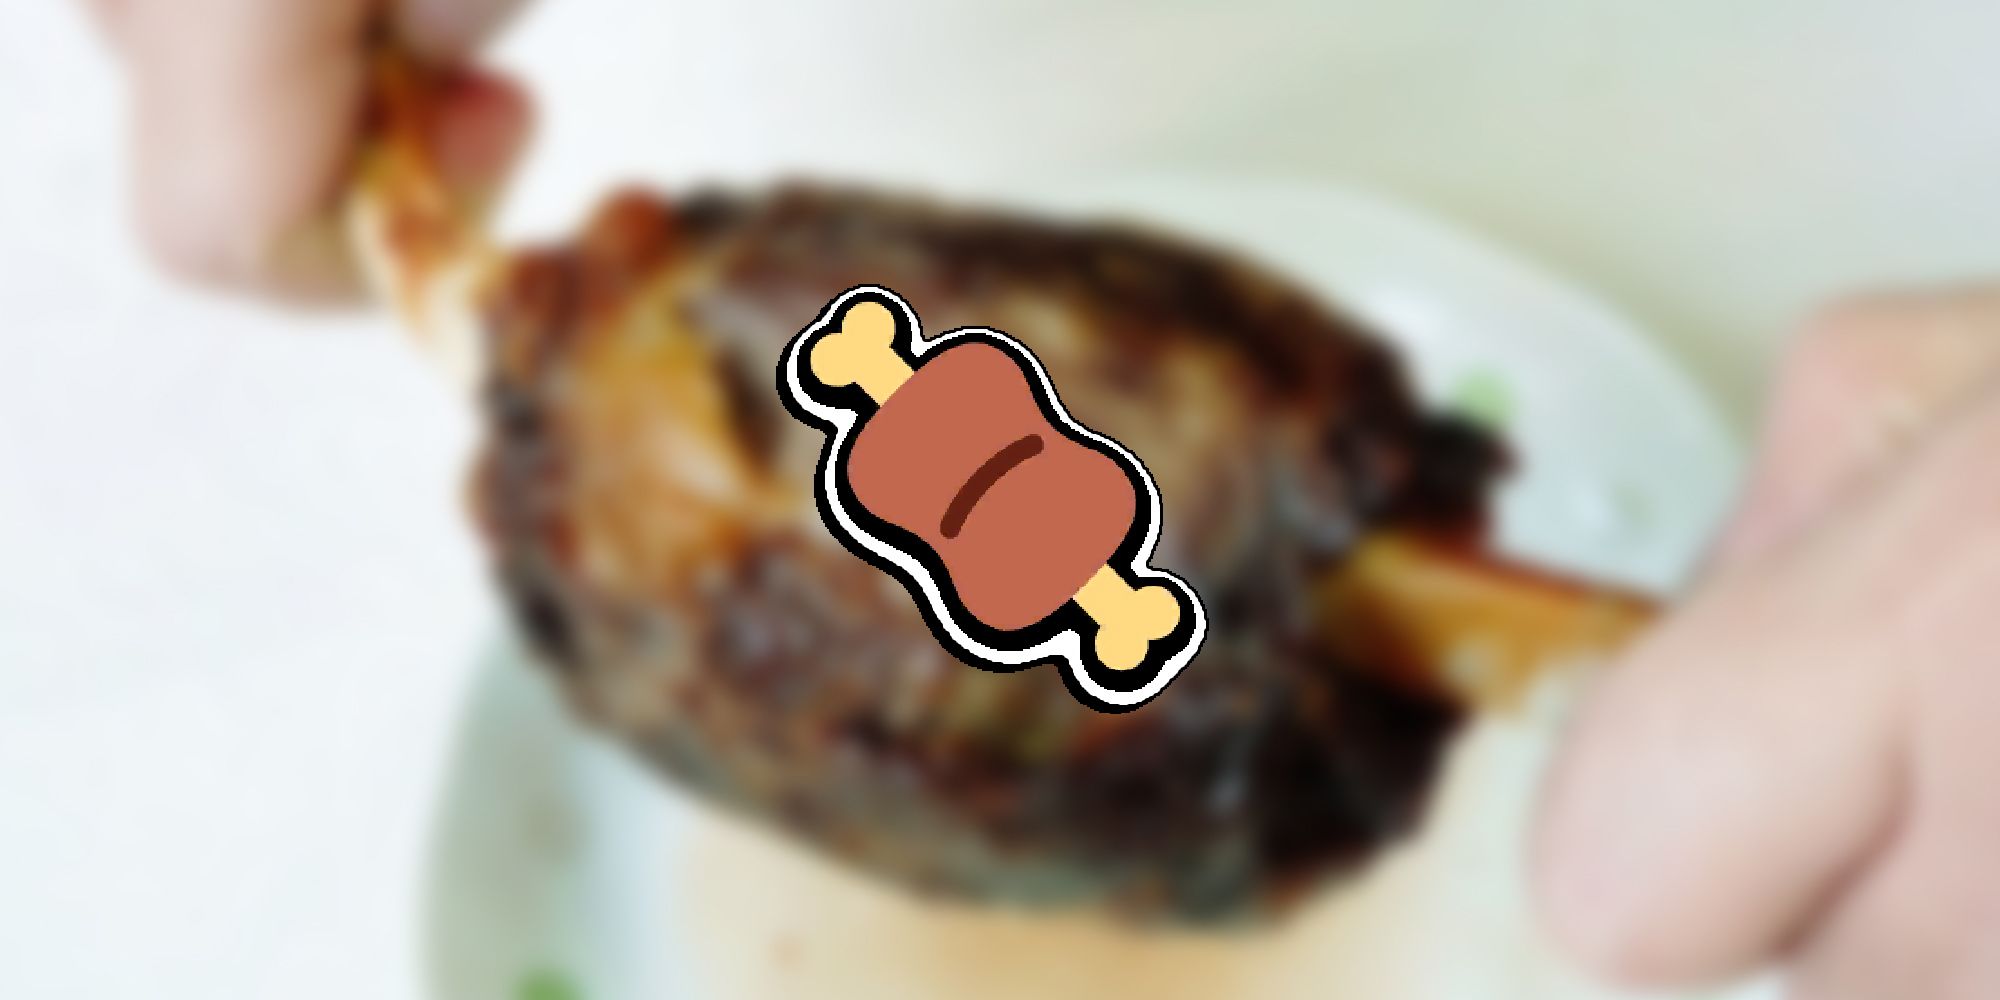 Super Auto Pets - In-Game Meat Bone Item PNG Overlaid On Image Of Similar Meat Bone In Real Life